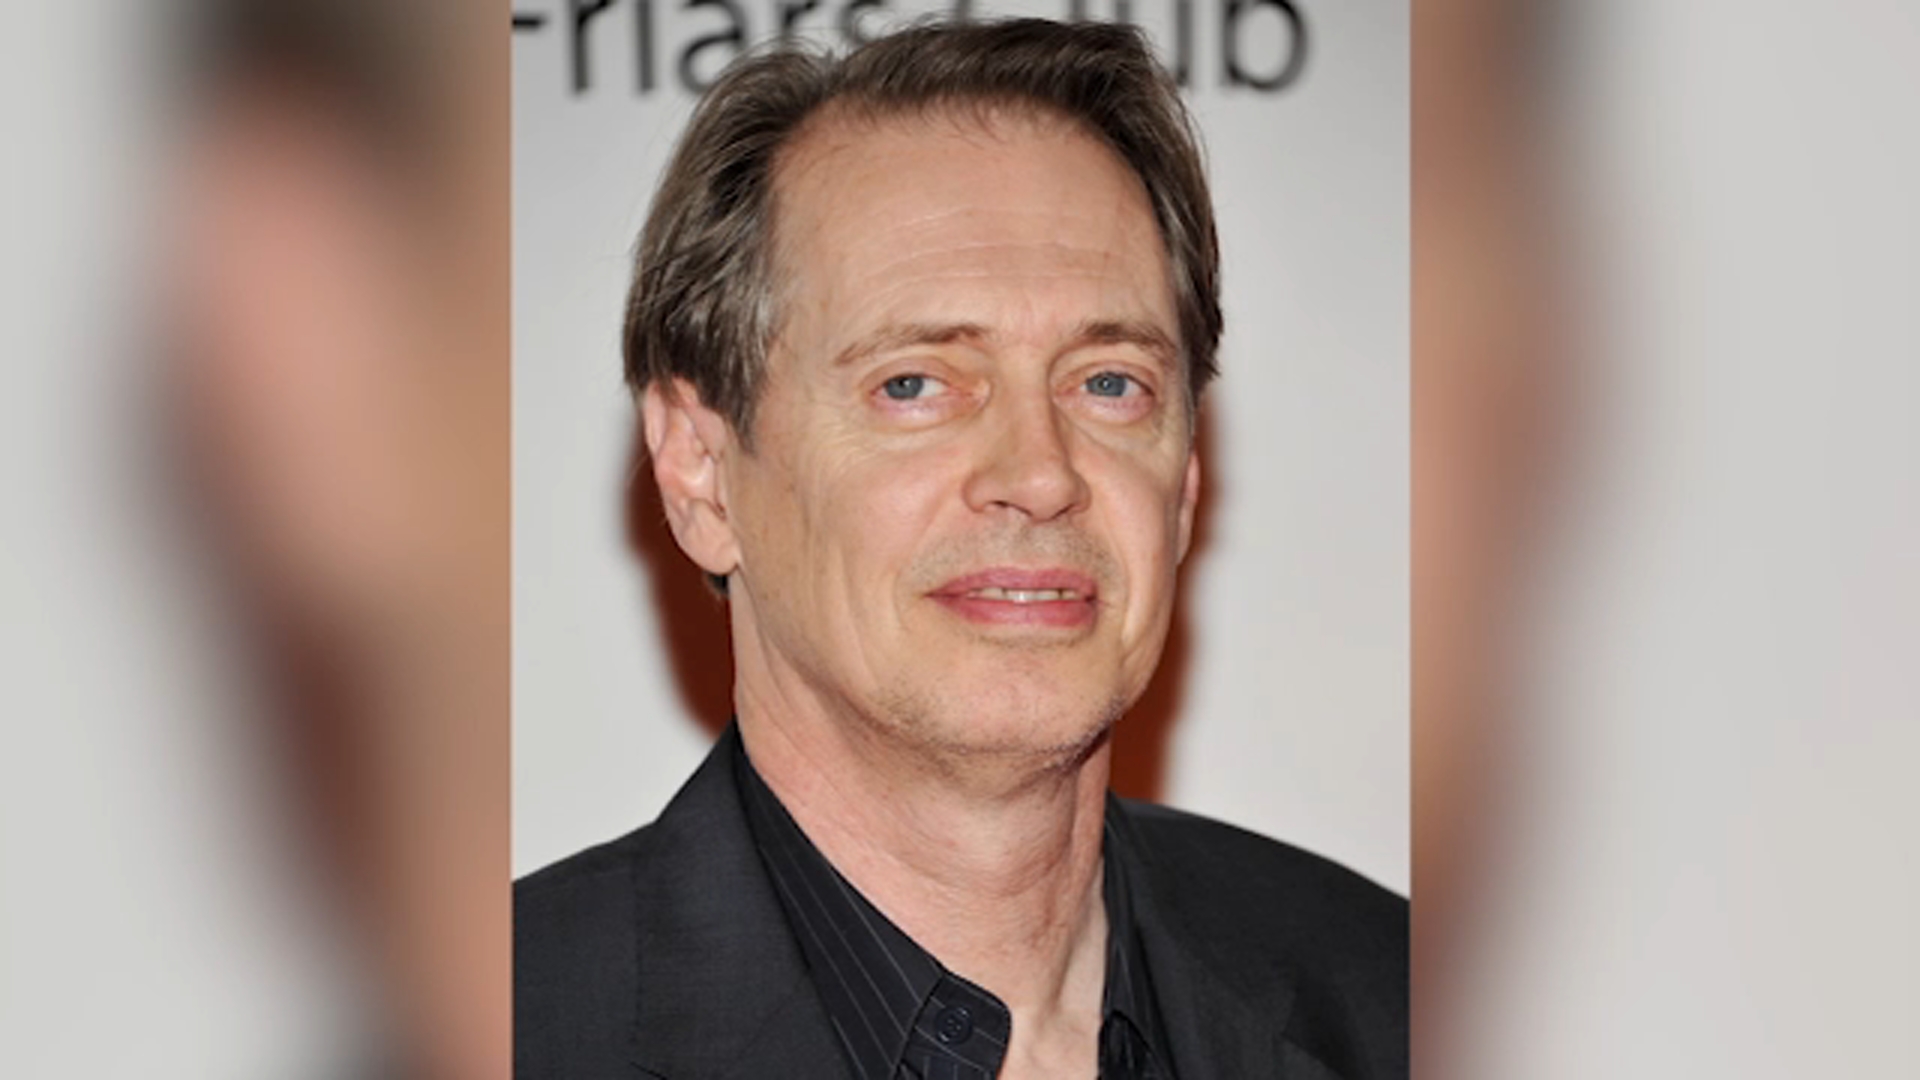 actor-steve-buscemi-punched-in-the-face-in-random-attack-in-new-york-city